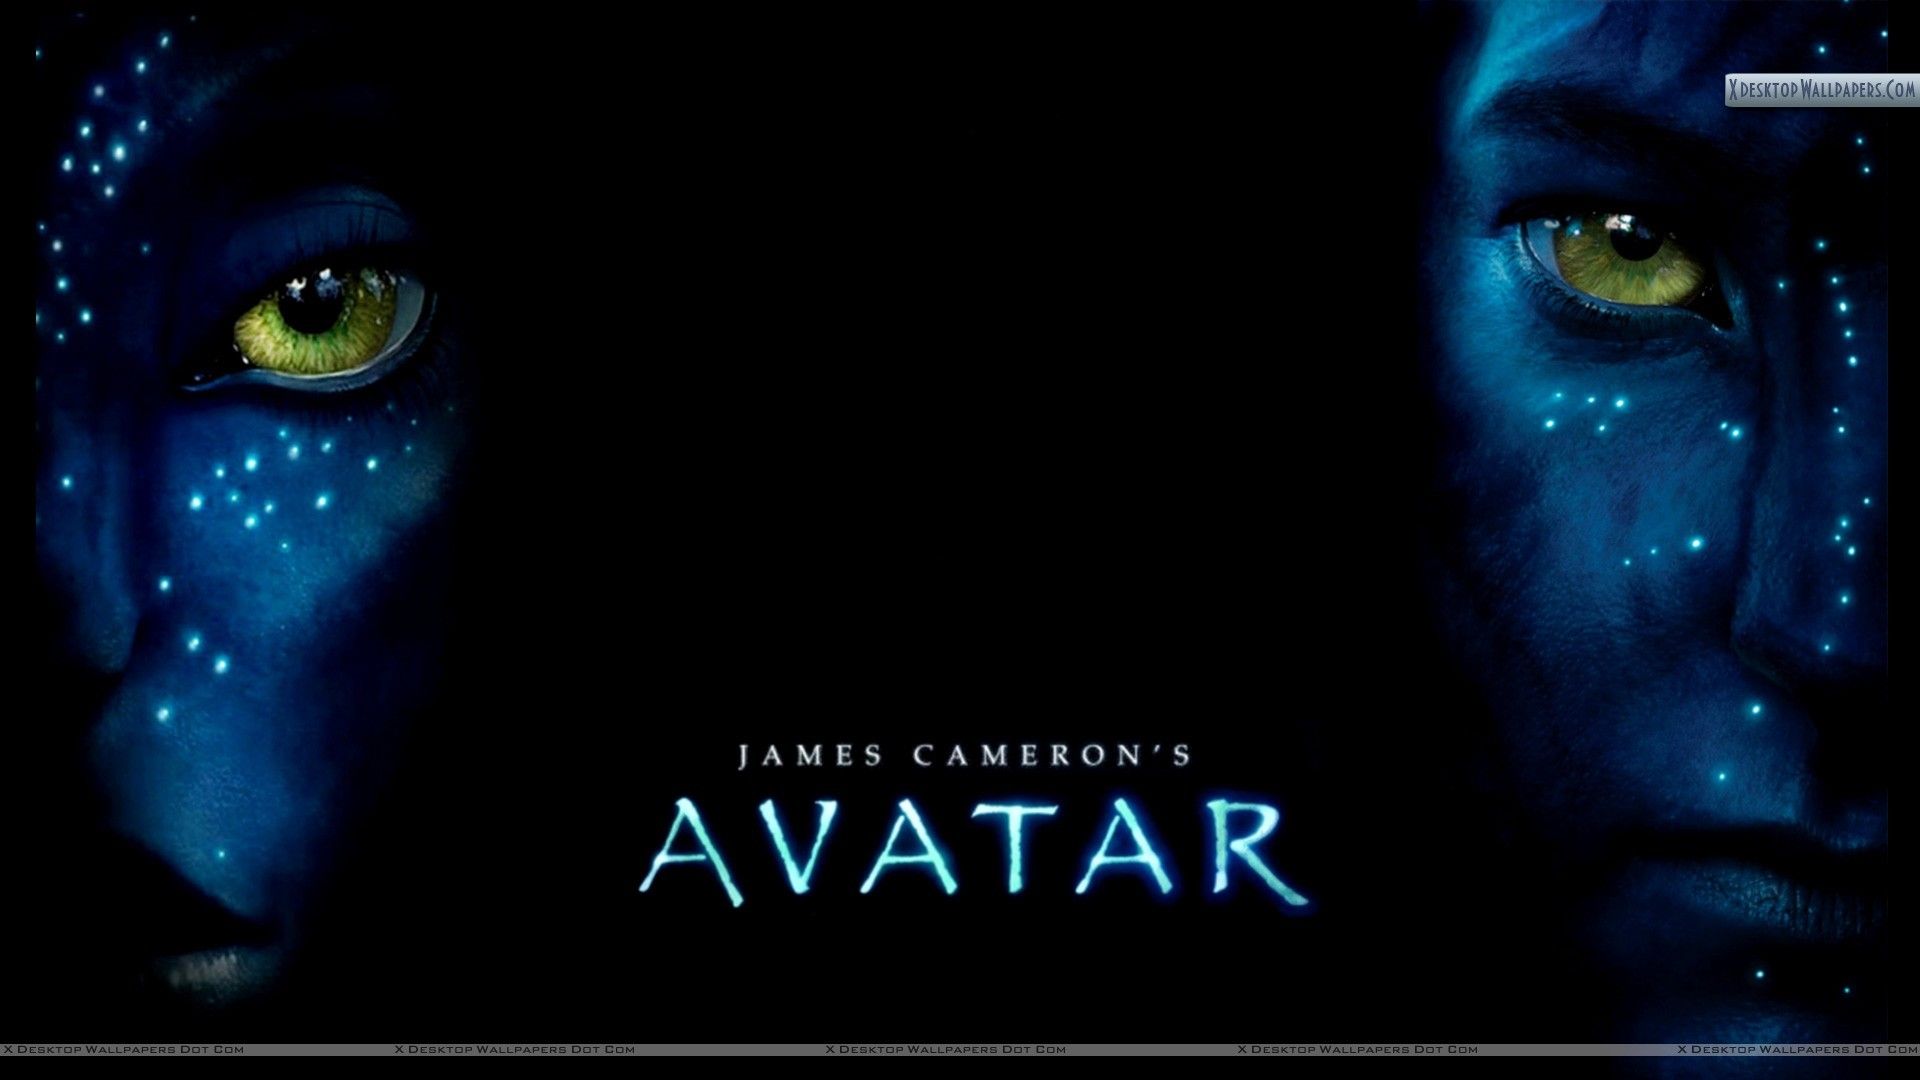 Avatar Poster Wallpapers - Wallpaper Cave